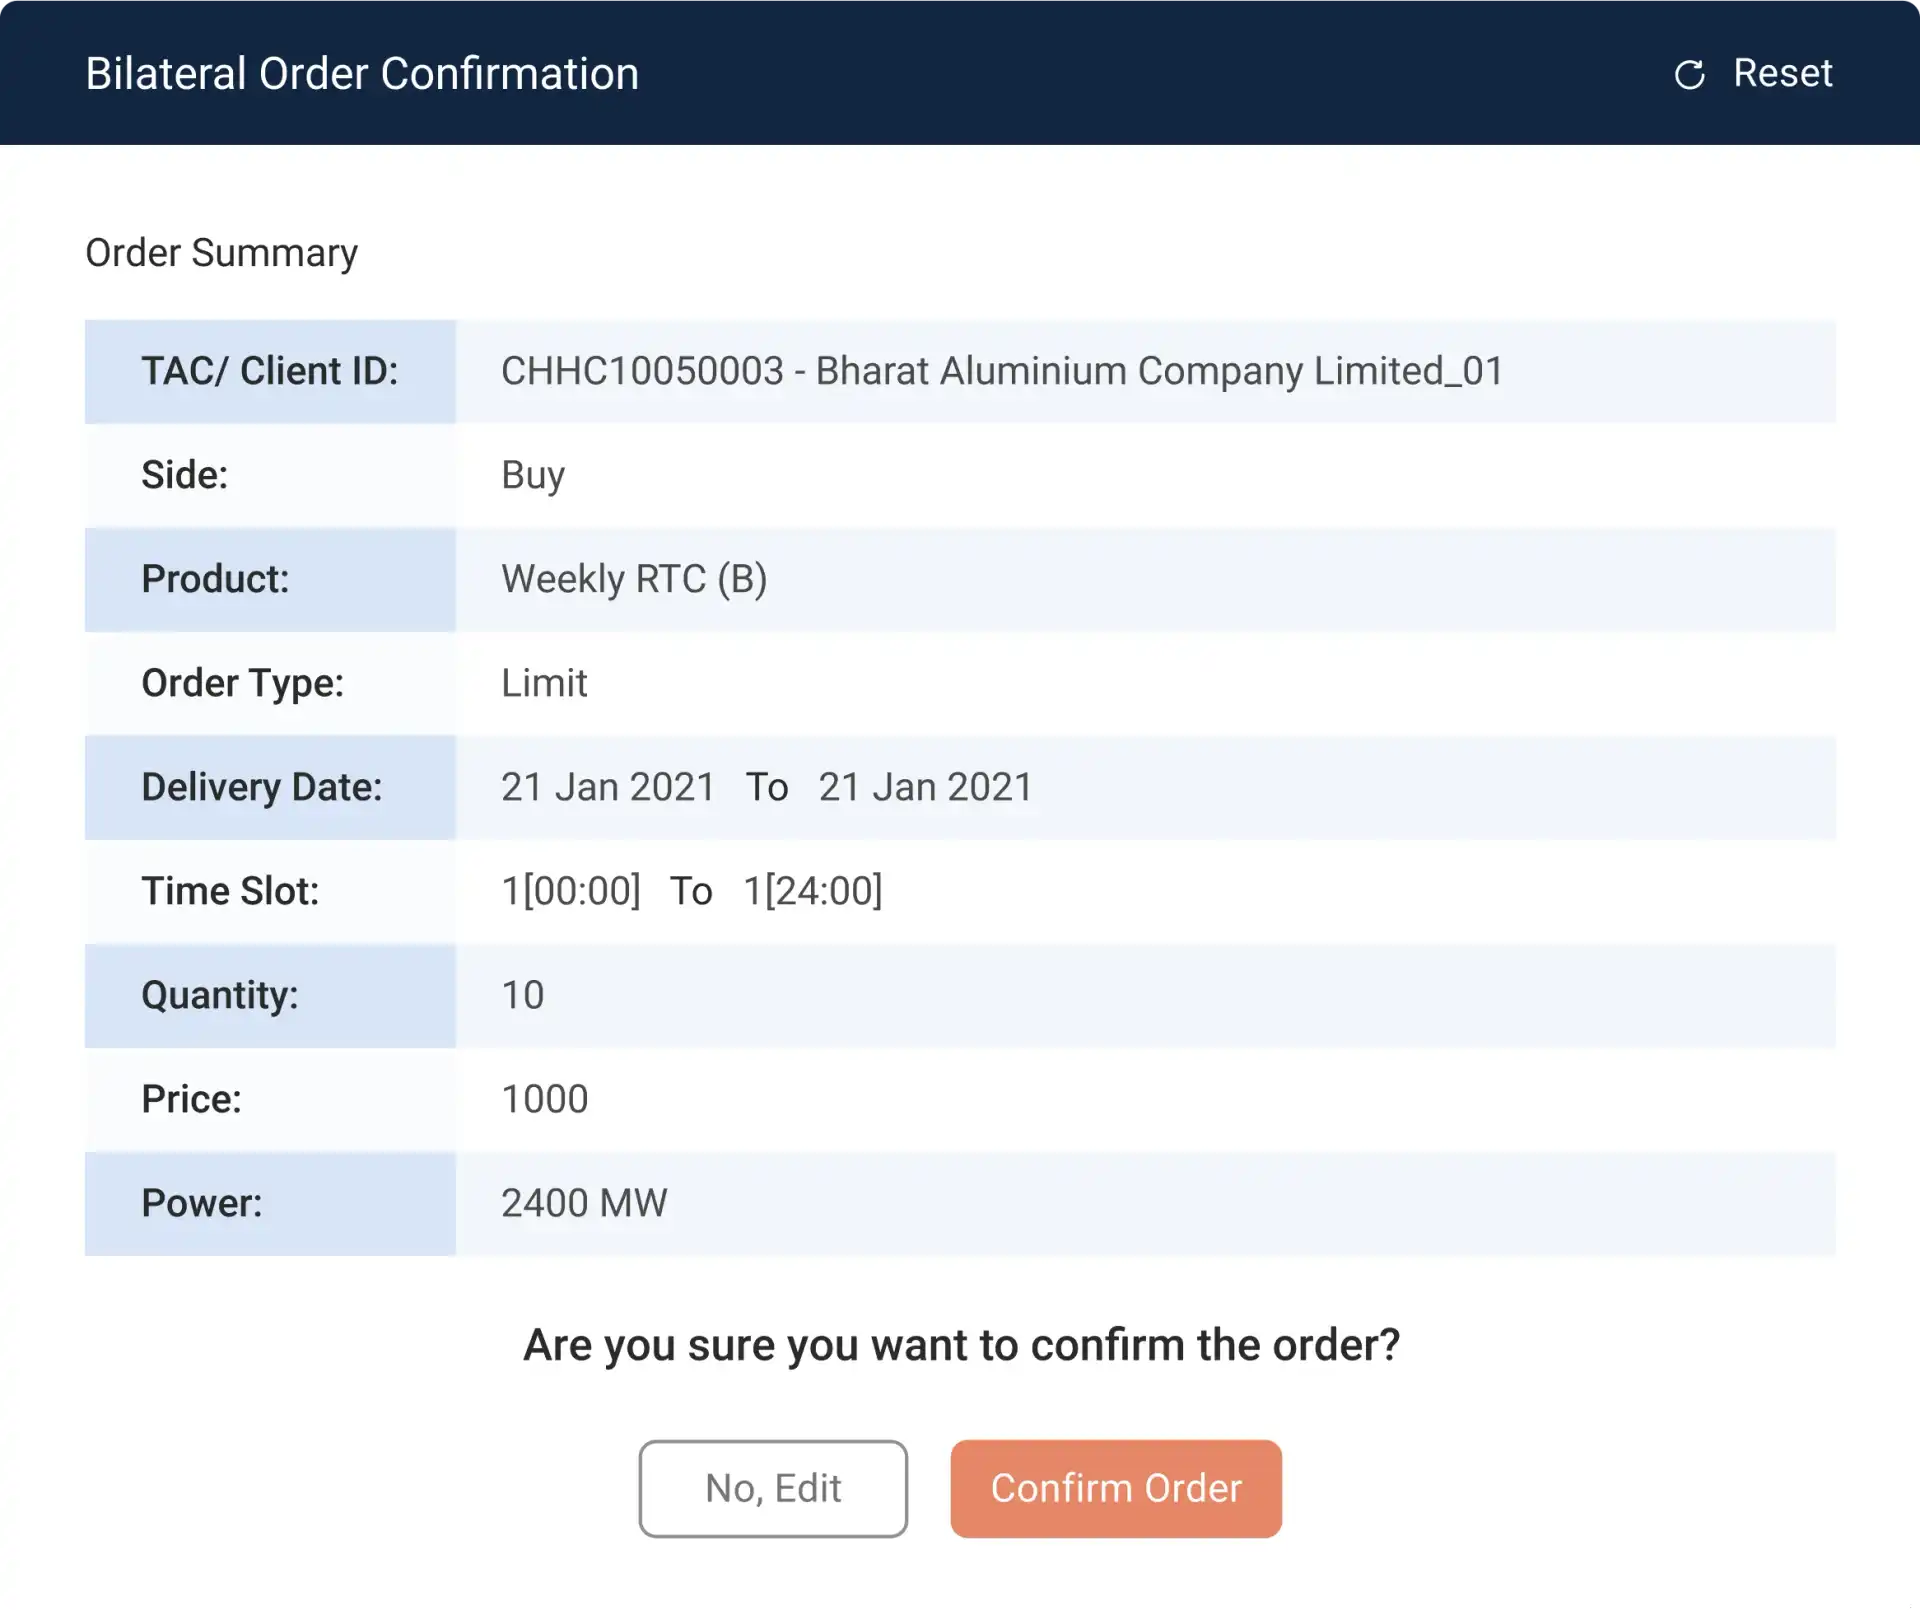 Check order summary and confirm the order